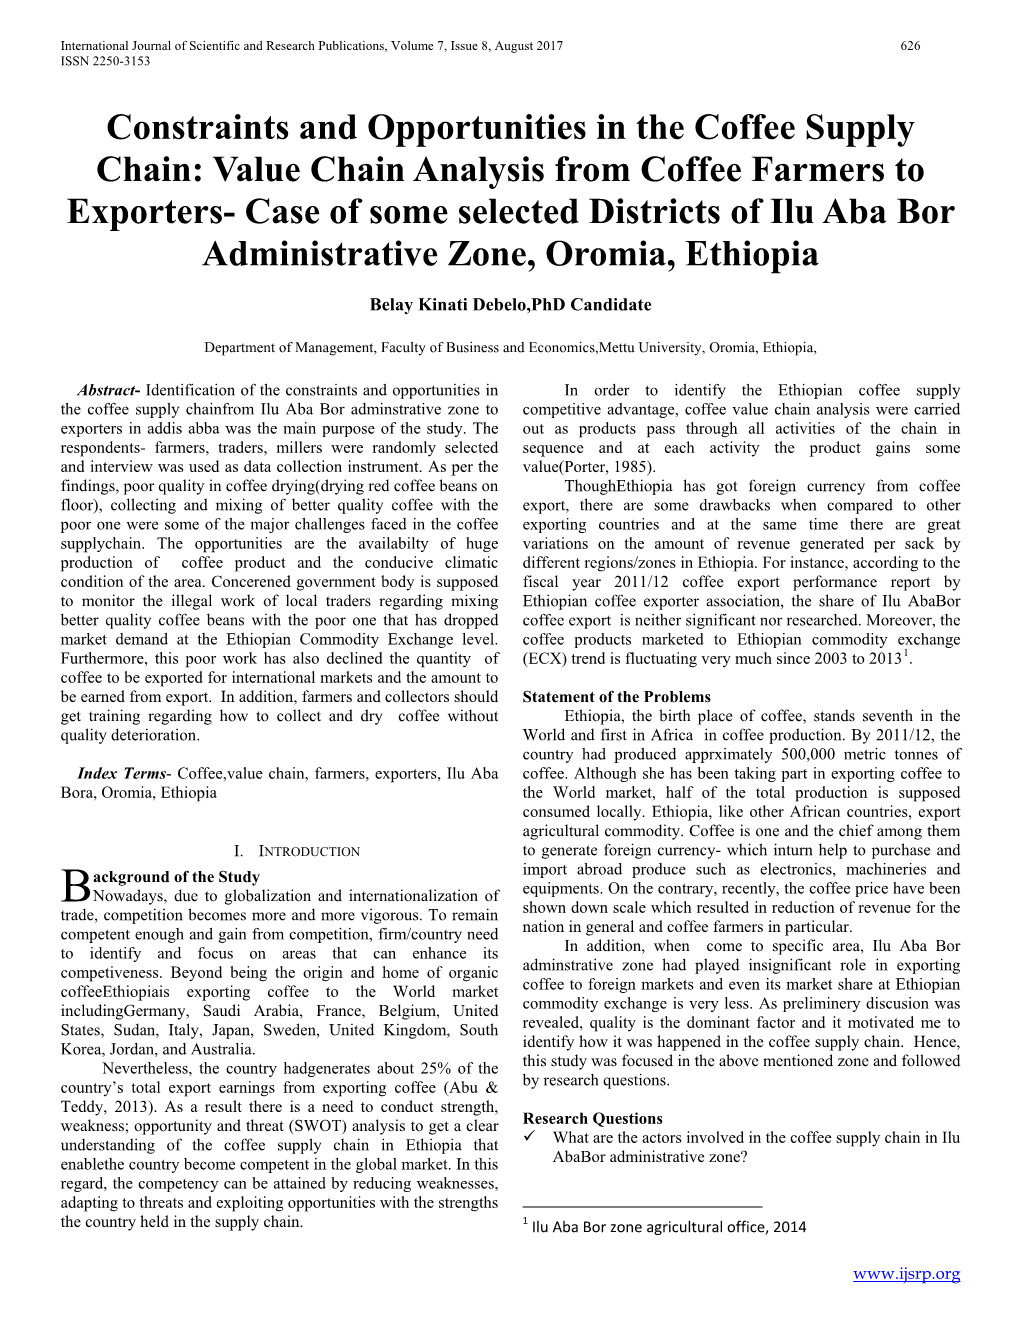 Value Chain Analysis from Coffee Farmers to Exporters- Case of Some Selected Districts of Ilu Aba Bor Administrative Zone, Oromia, Ethiopia